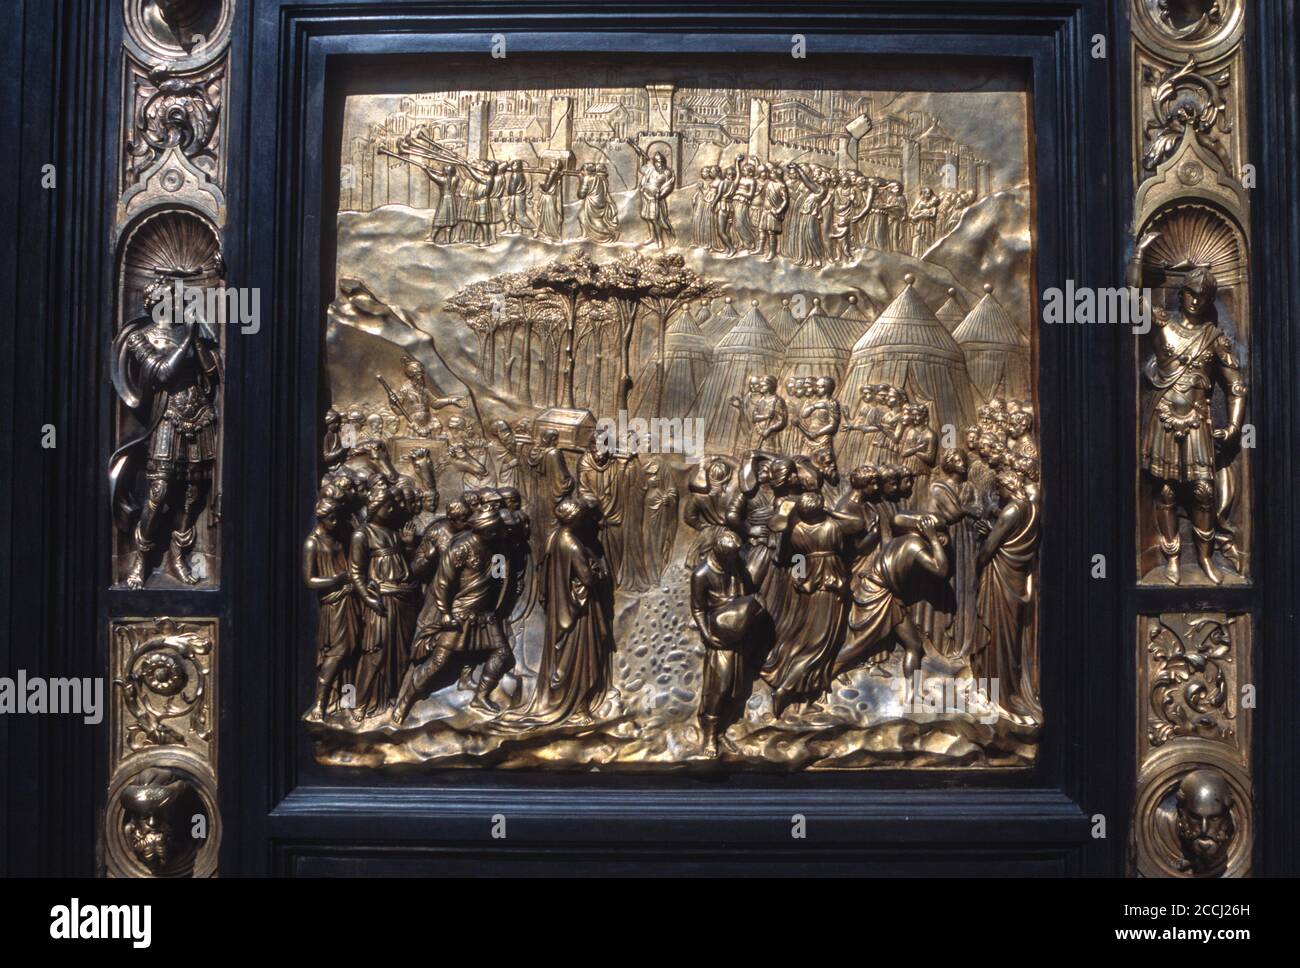 San Francisco, California, USA. Grace Cathedral (Episcopal). Entrance Door Detail Depicting a Scene from the Old Testament, Copy of Original by Sculptor Lorenzo Ghiberti. Stock Photo